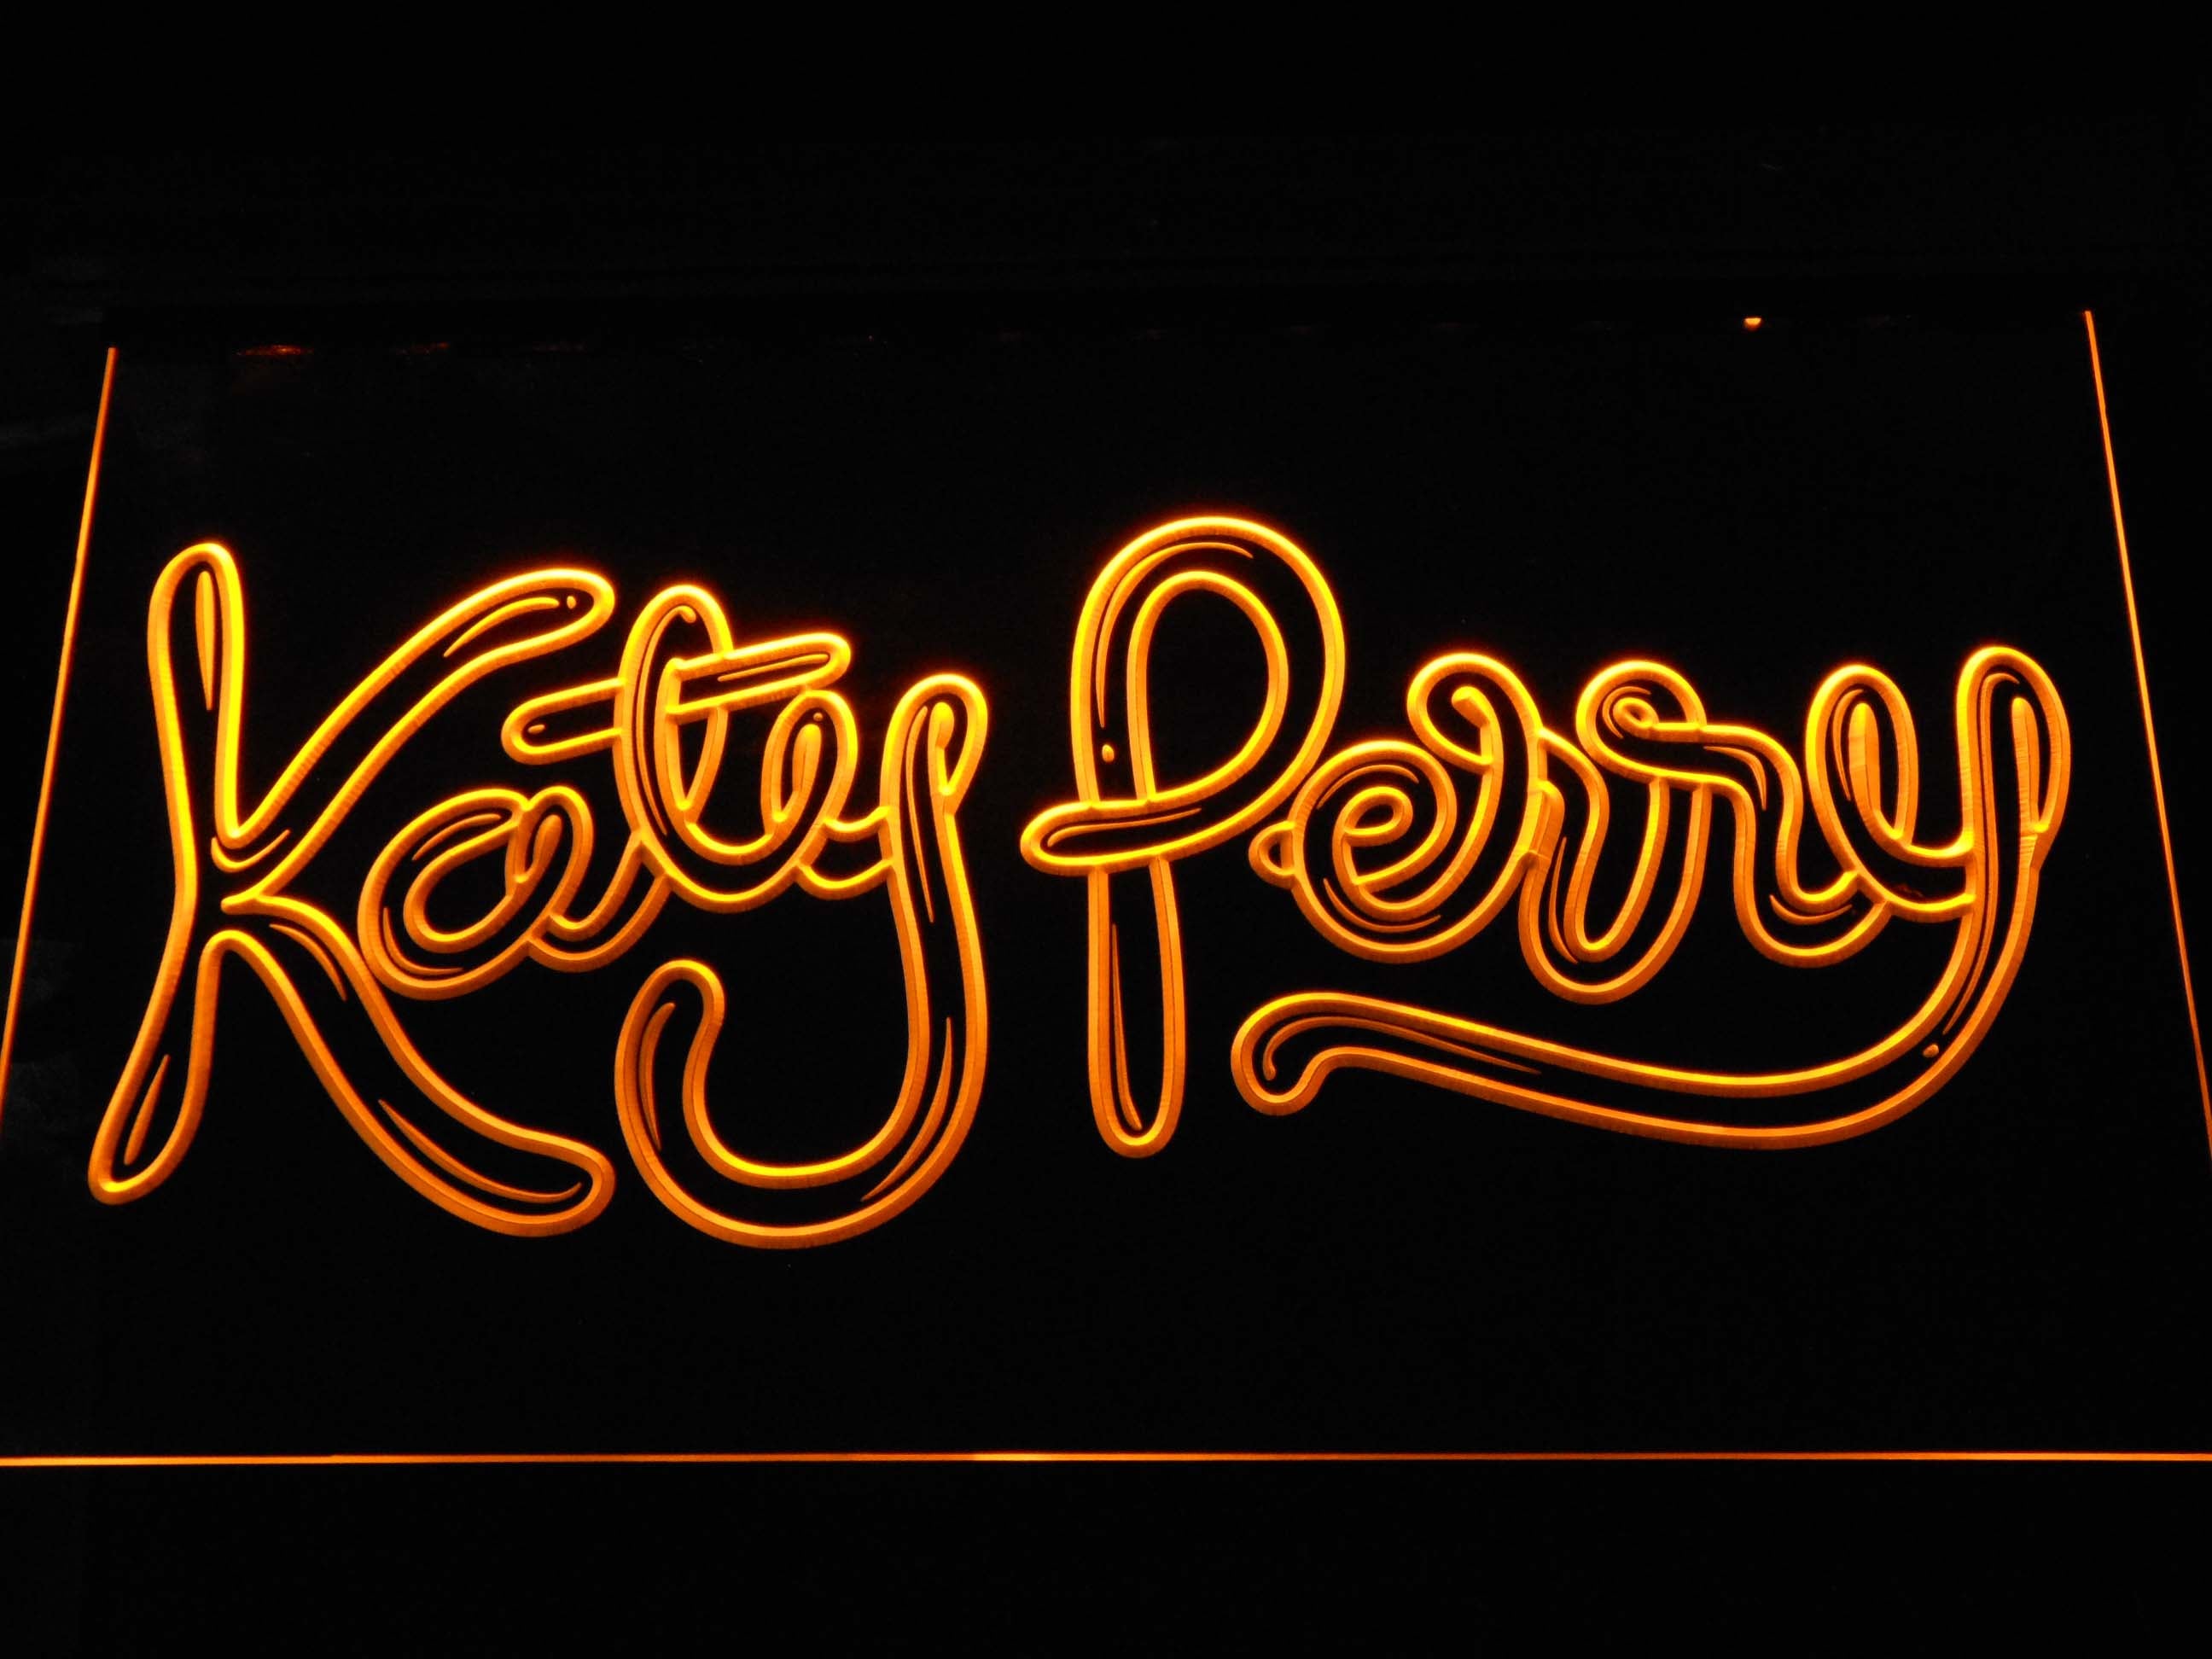 Katy Perry American Singer Neon Light LED Sign